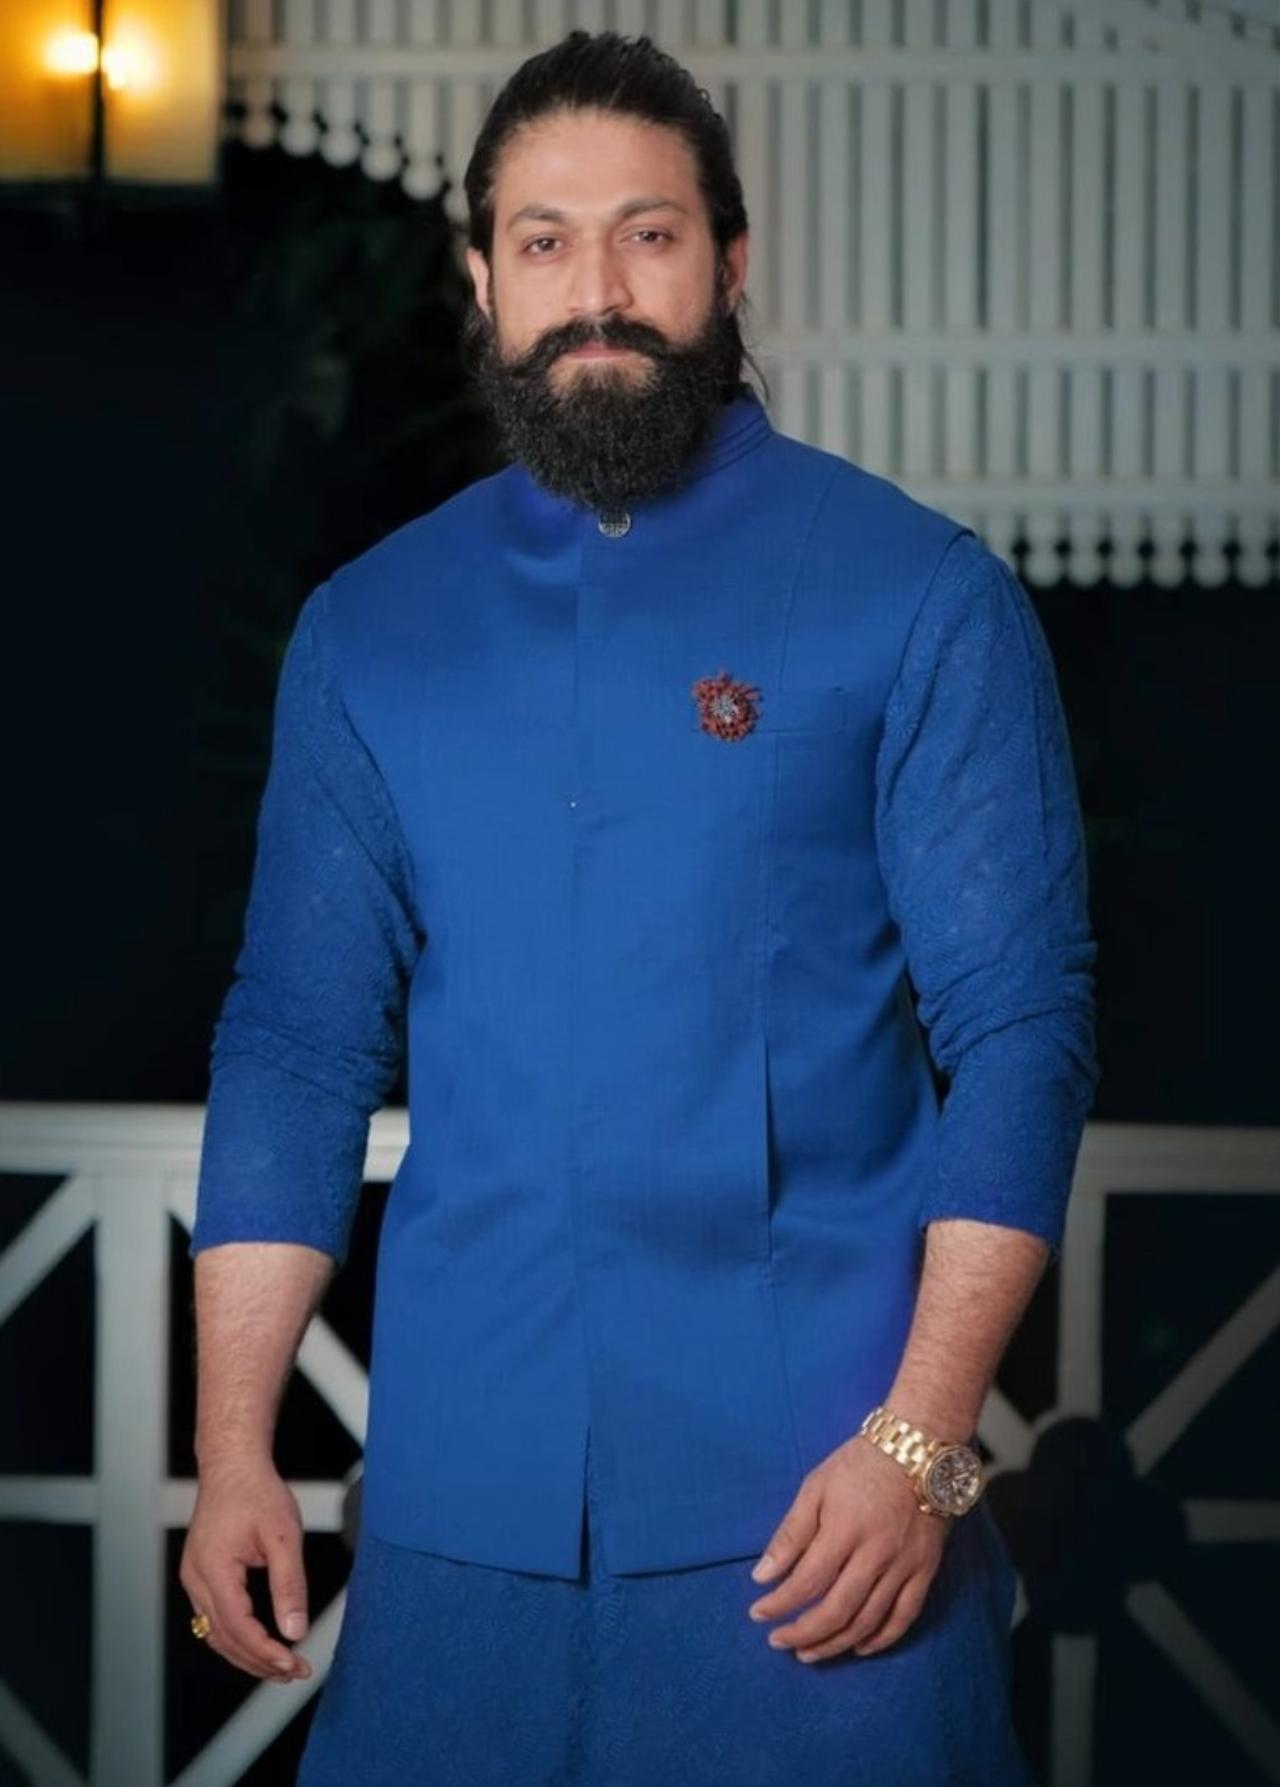 Takes our blues away in his blue ethnic outfit, Yash showed yet another side to his versatile fashion sense. Donning a blue kurta with a matching waistcoat, the 'Gajakesari' actor lit up the frame in this simple yet suave look